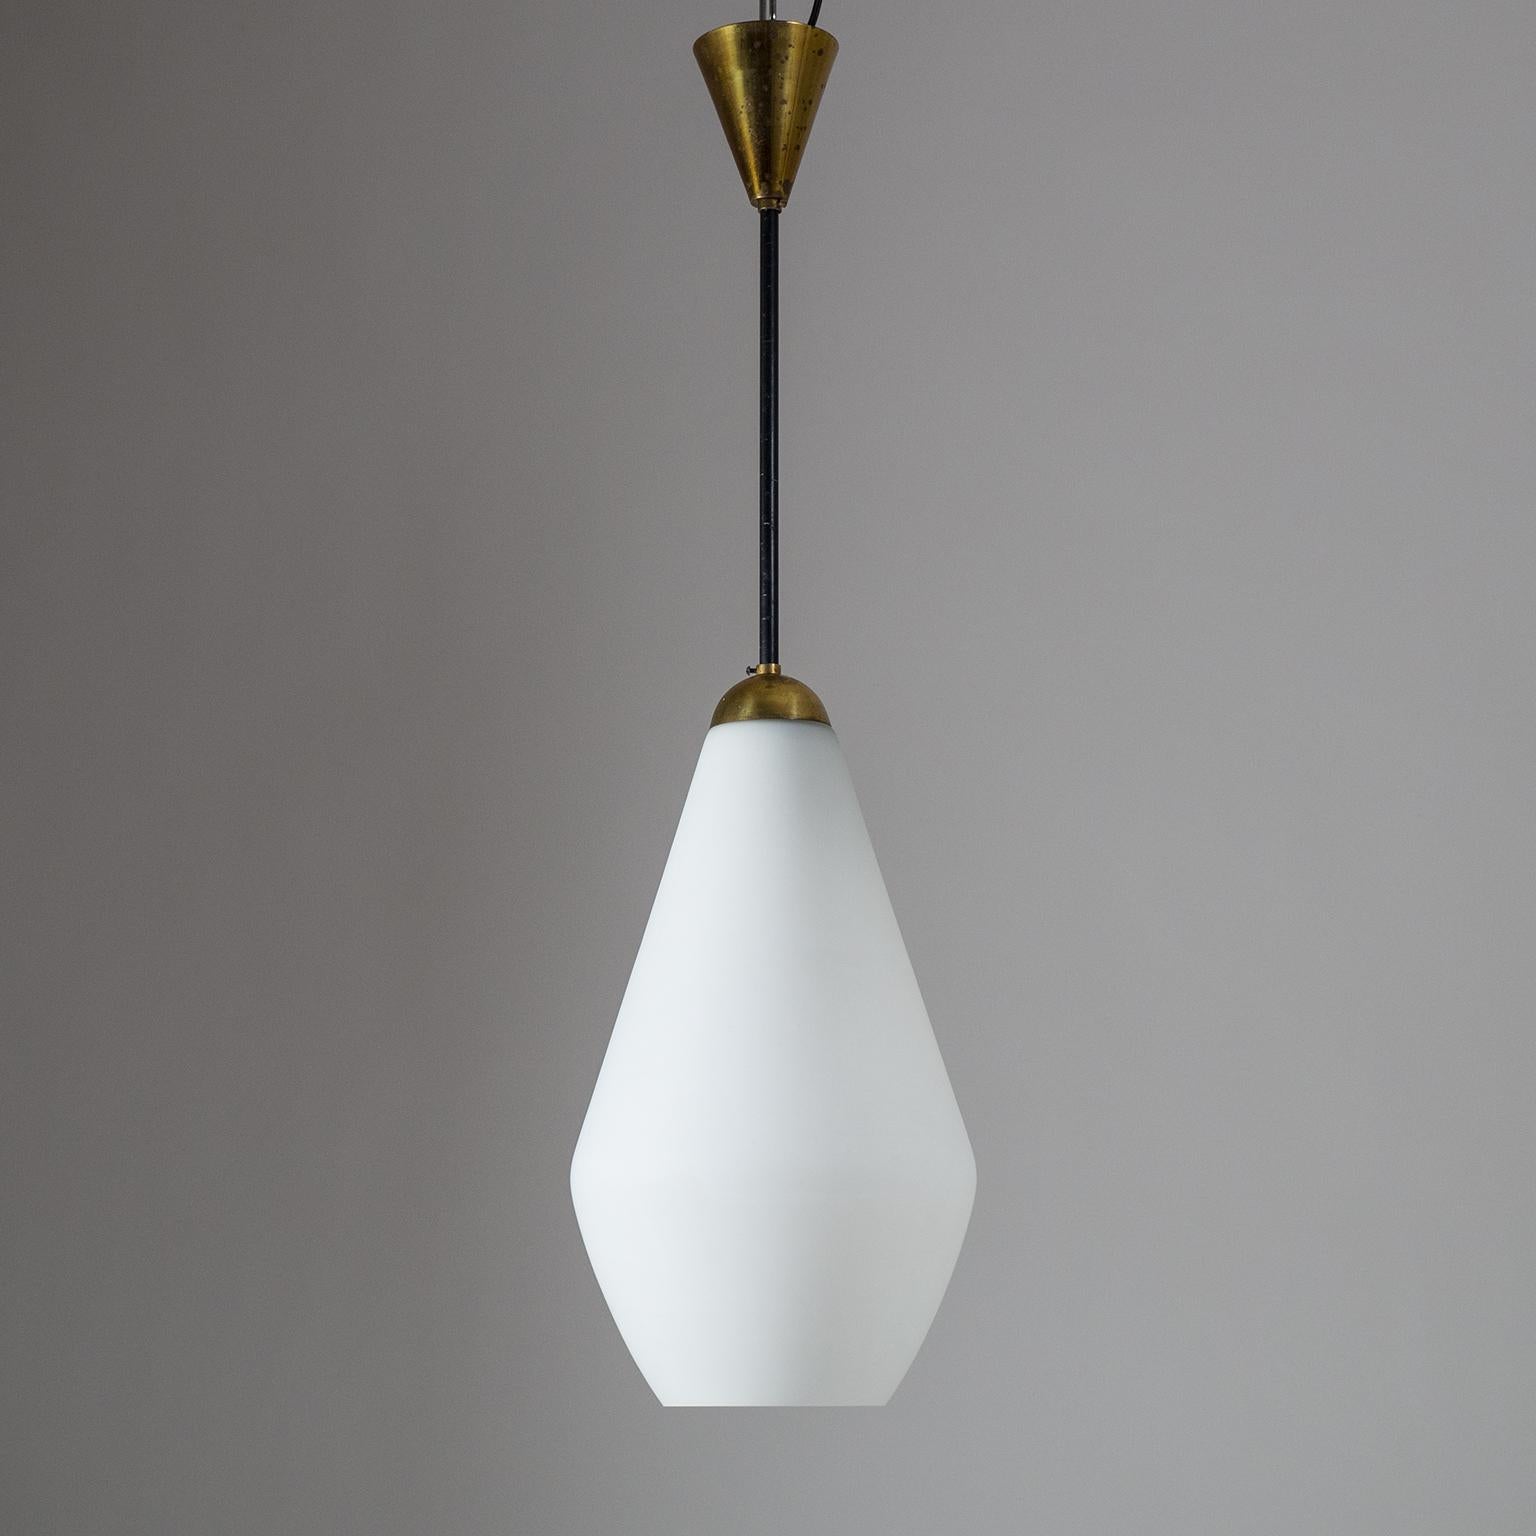 Italian satin glass pendant from the 1950s in the style of Stilnovo. Classic midcentury color scheme of brass, black and white. The double conical diffuser is made of 'triplex opal' glass with a satin finish and is suspended from a black lacquered